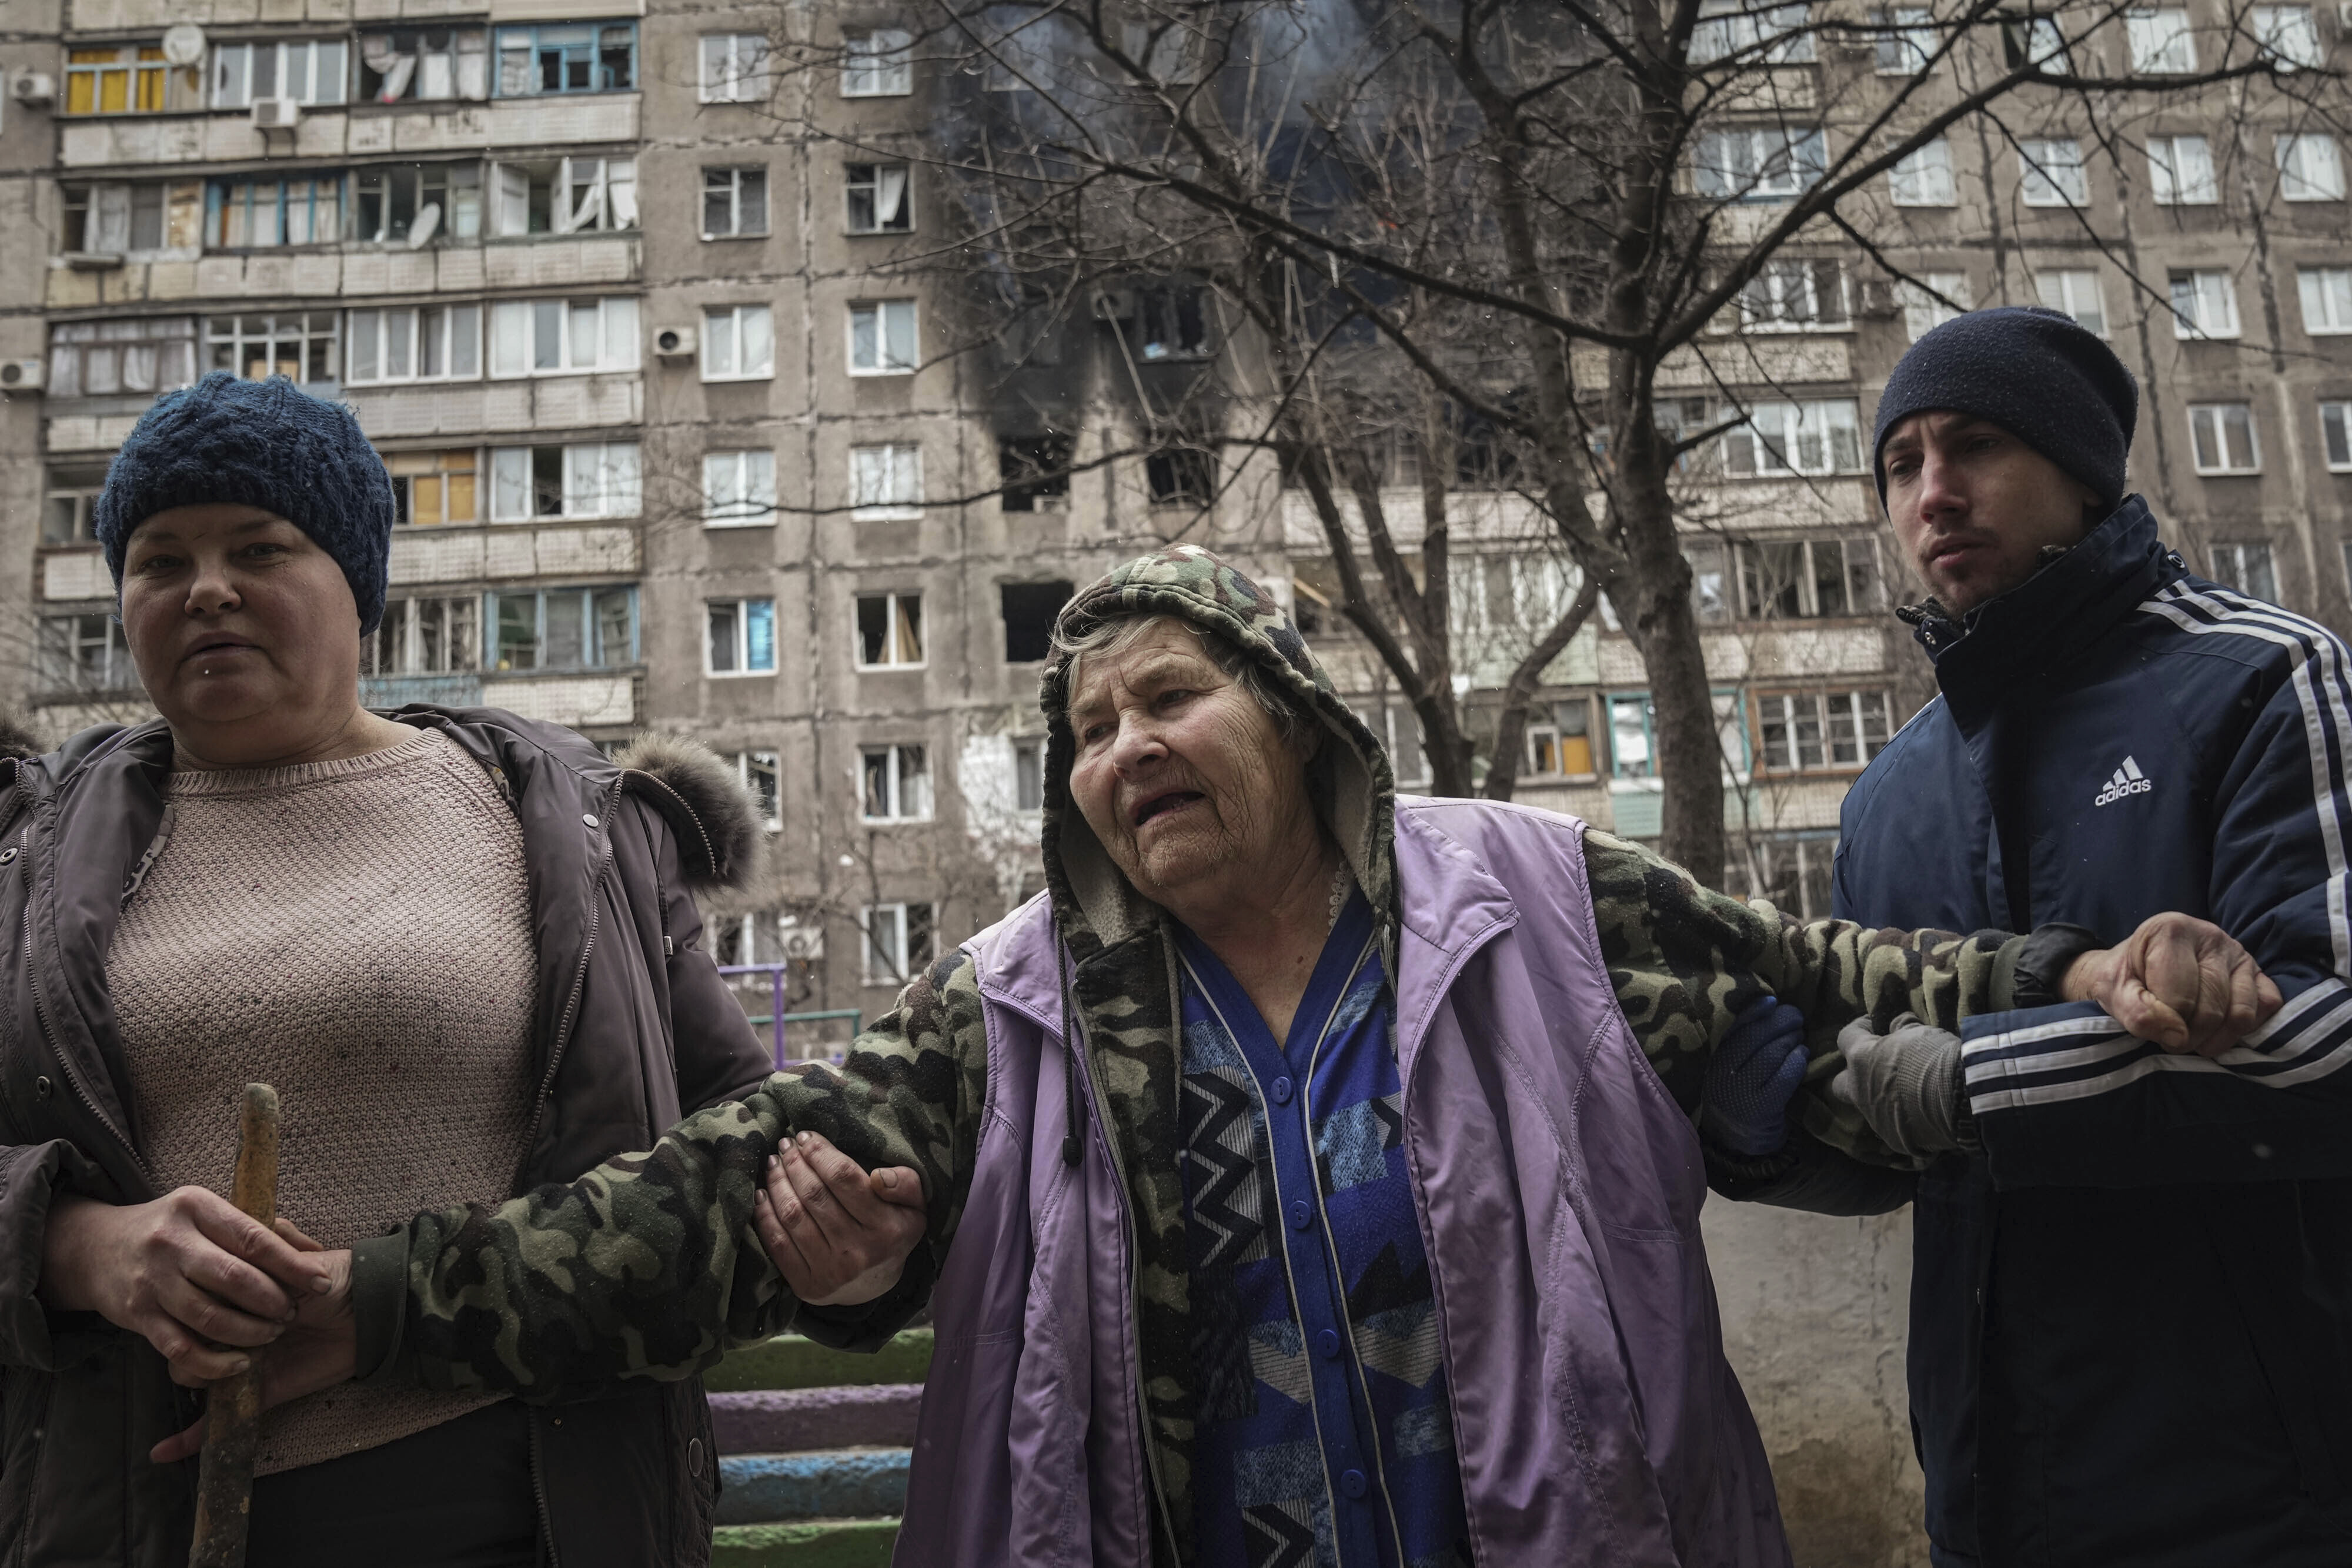 People help an elderly woman to walk in a street with an apartment building hit by shelling in the background in Mariupol, Ukraine, Monday, March 7, 2022.